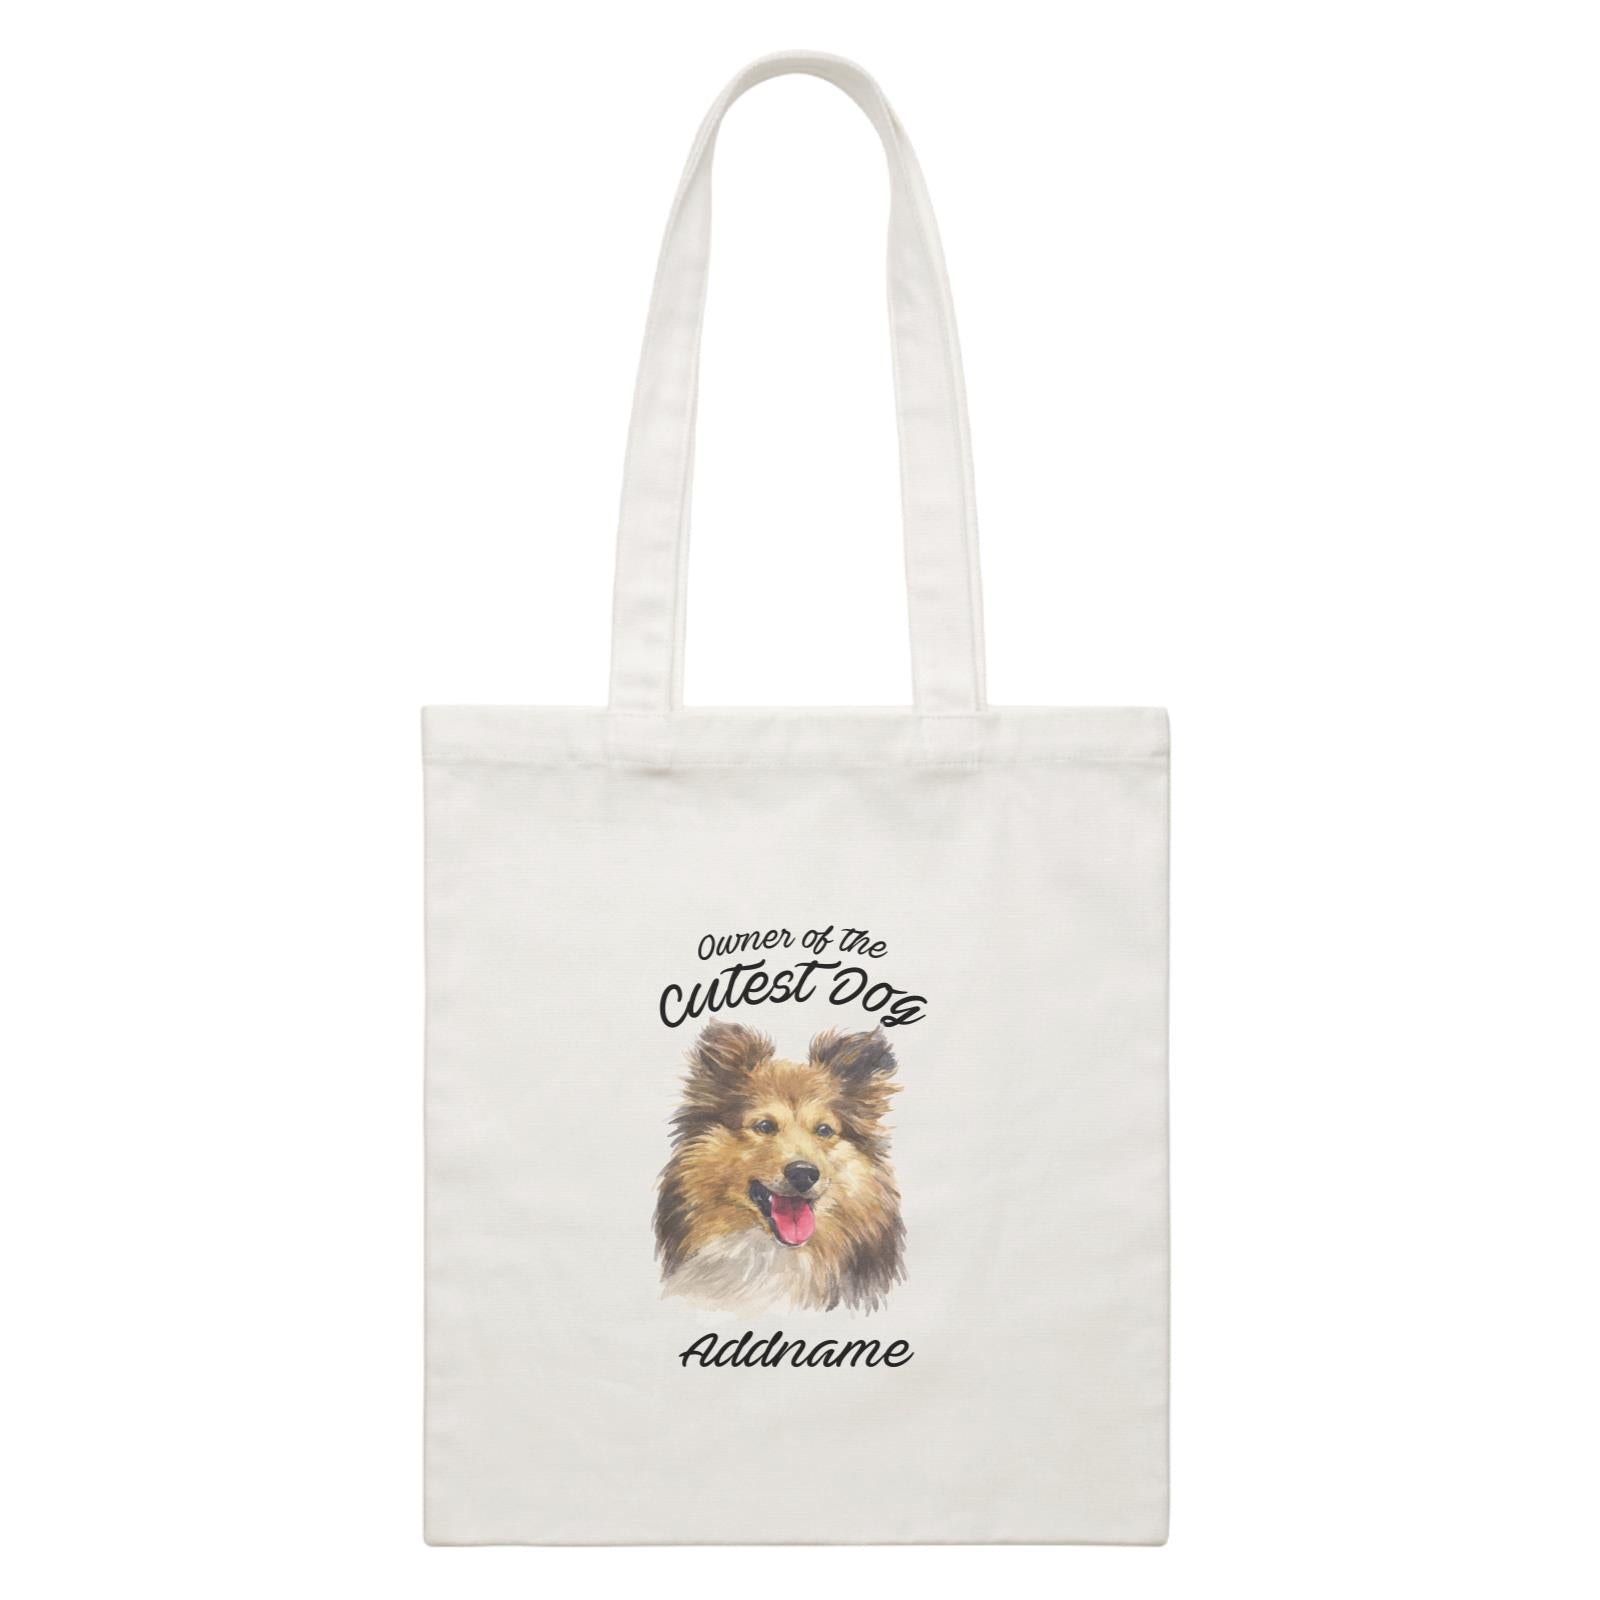 Watercolor Dog Owner Of The Cutest Dog Shetland Sheepdog Addname White Canvas Bag